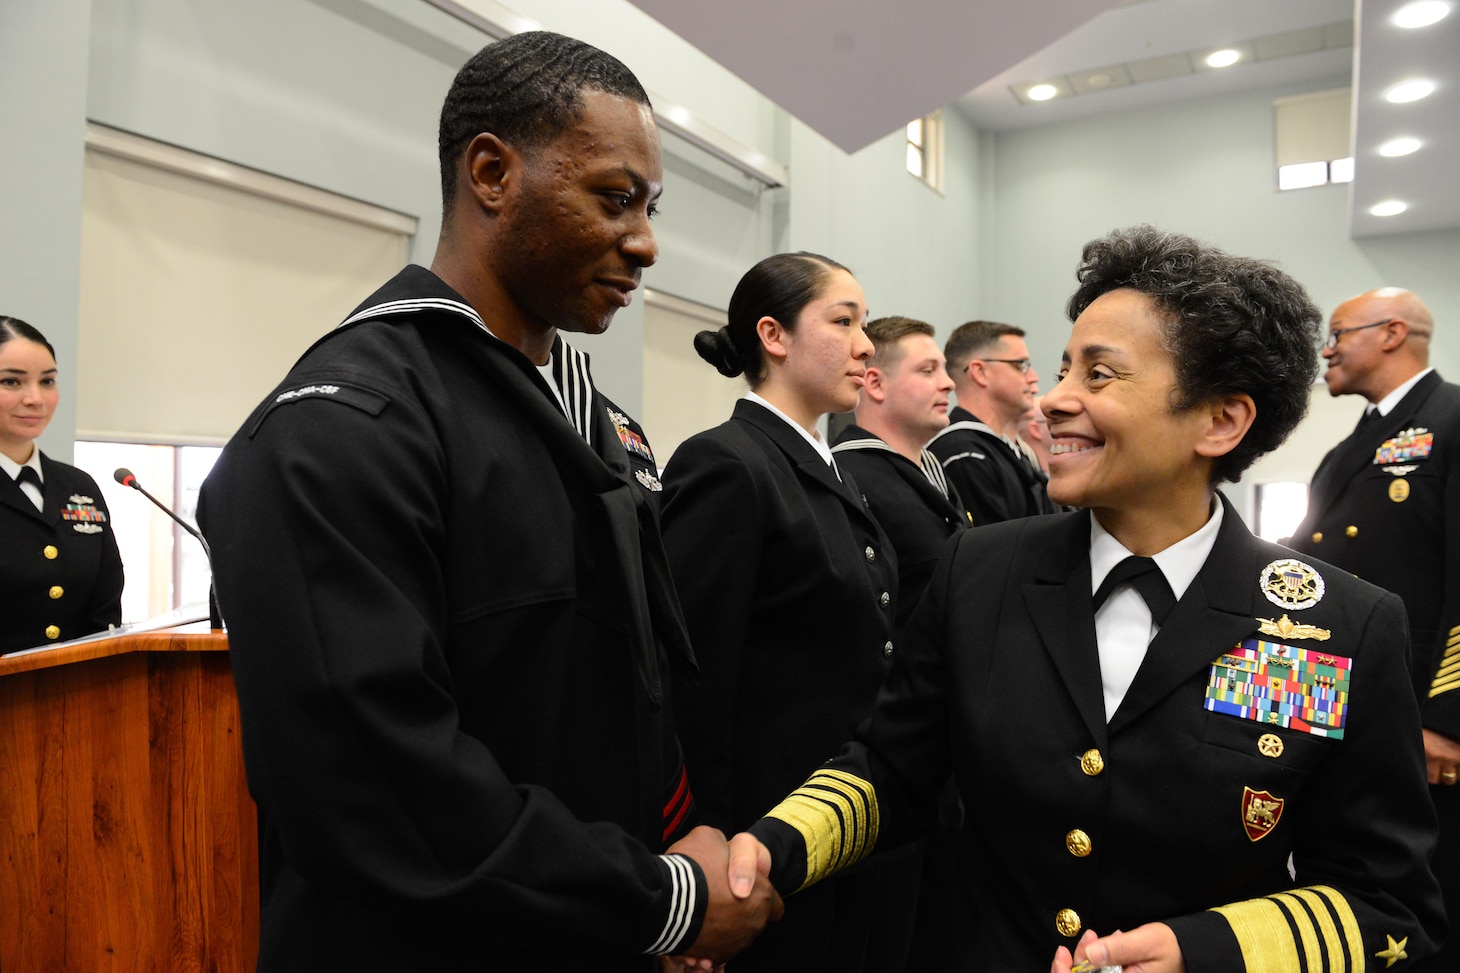 Michelle Howard on the right in uniform smiling and shaking with Sailor standing